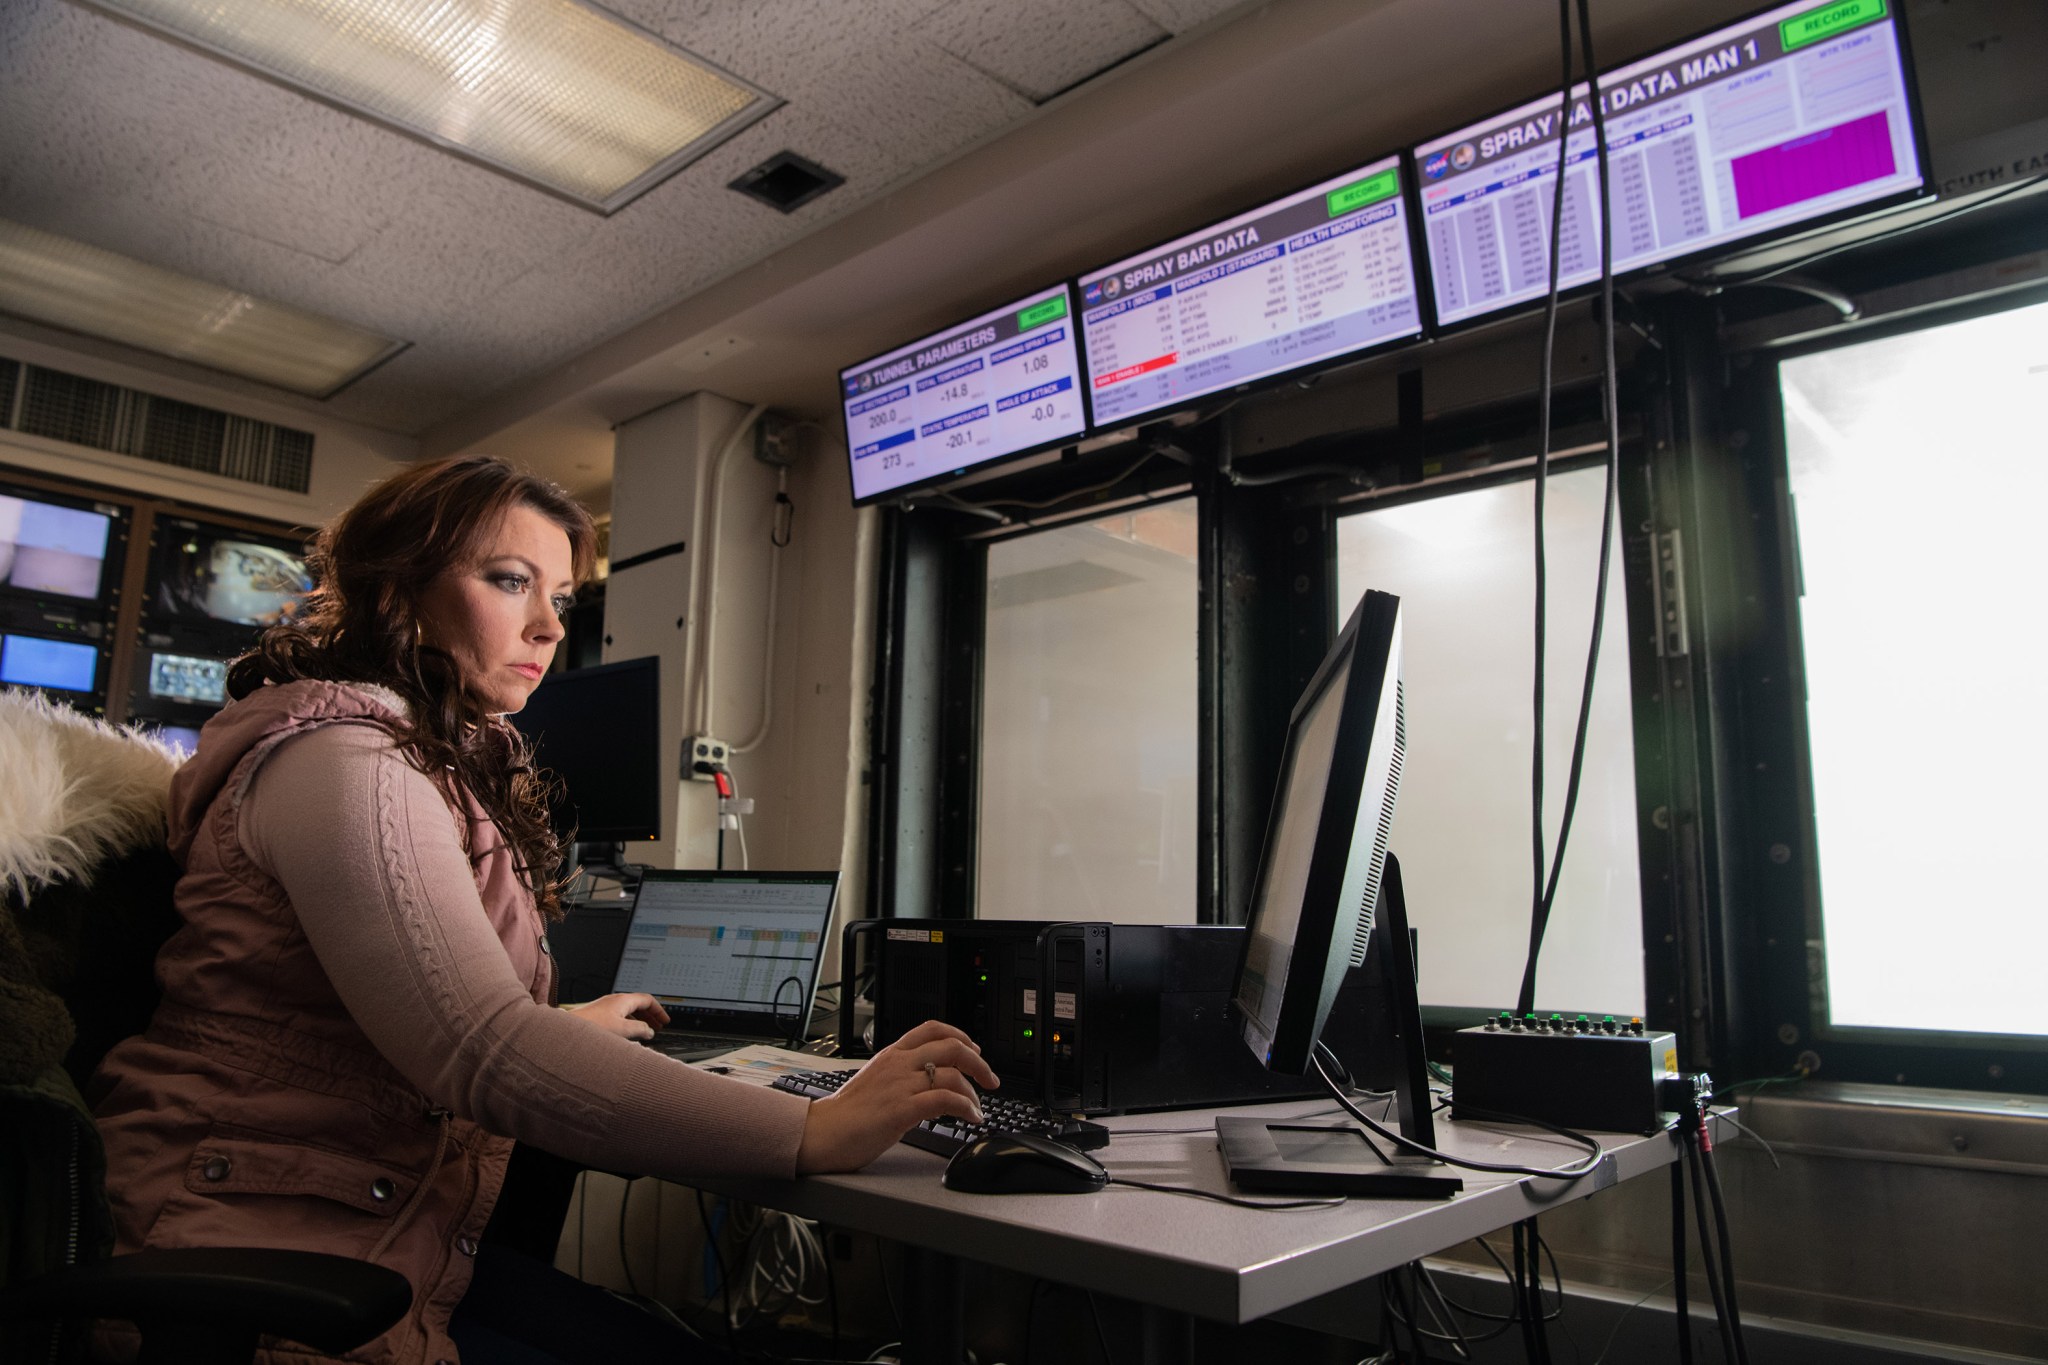 Engineer Emily Timko works at a computer station in the Icing Research Tunnel at Glenn Research Center.